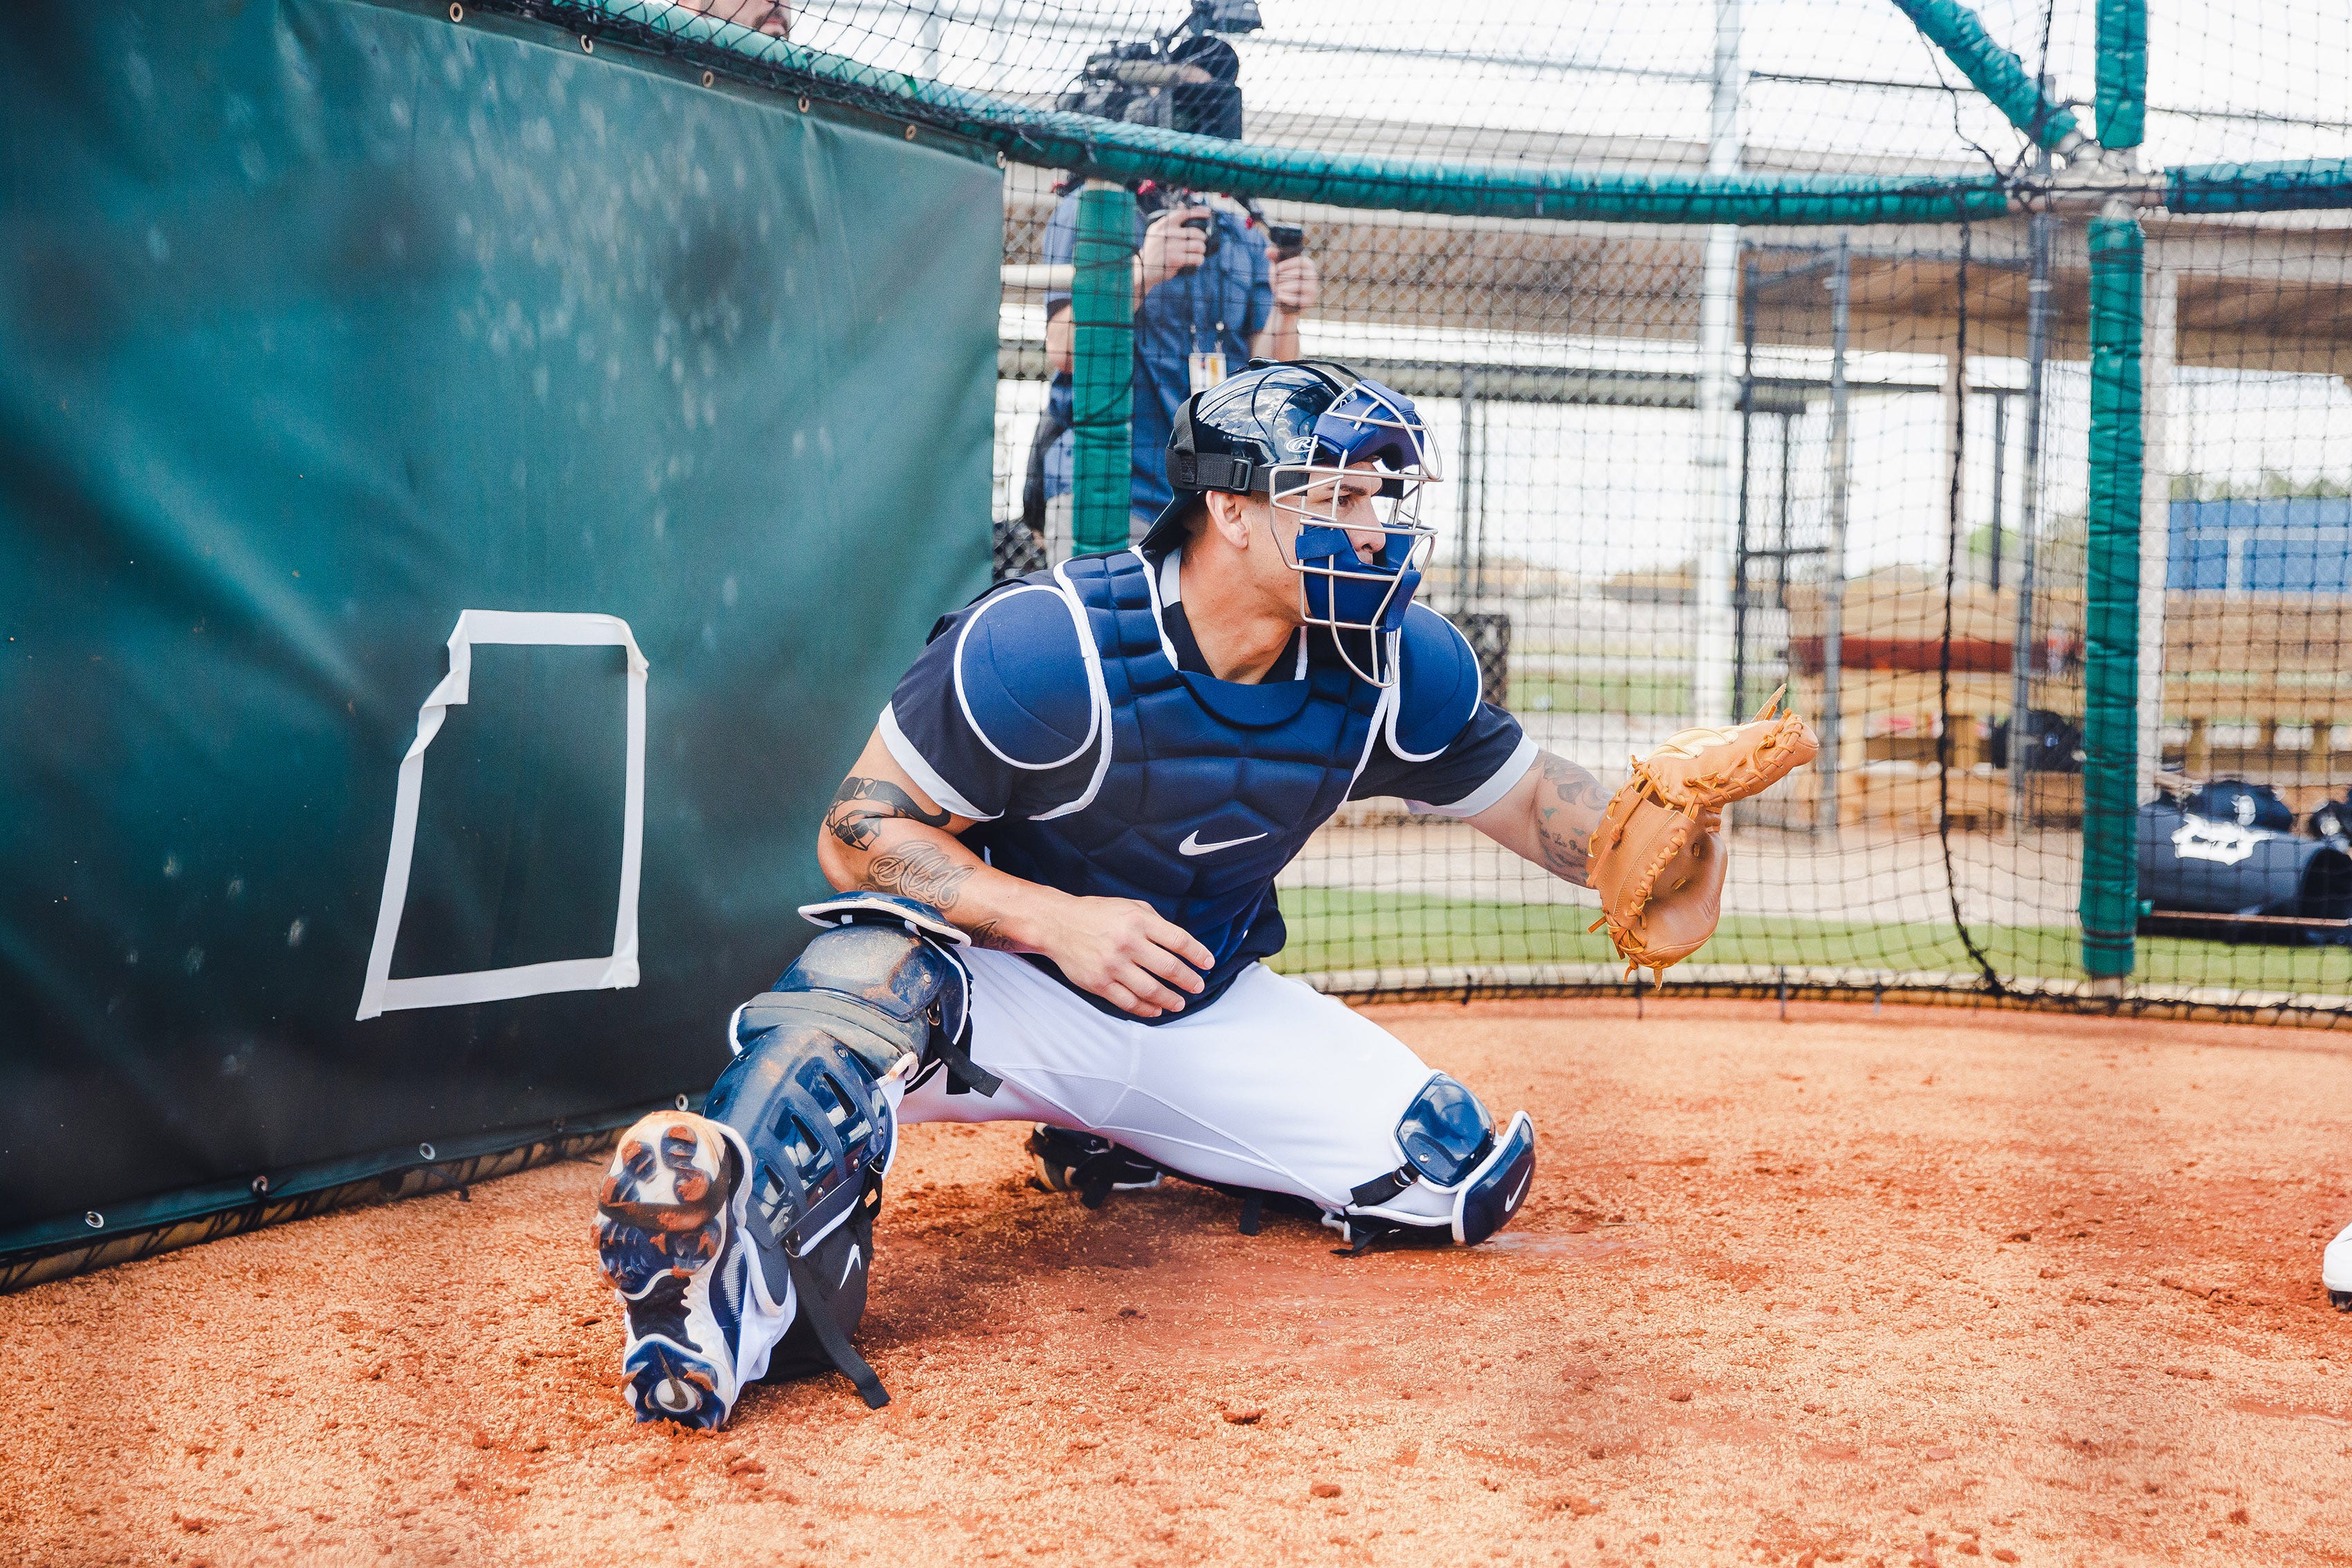 Tigers catcher Wilson Ramos works behind the plate in Lakeland, Florida on February 24, 2021.